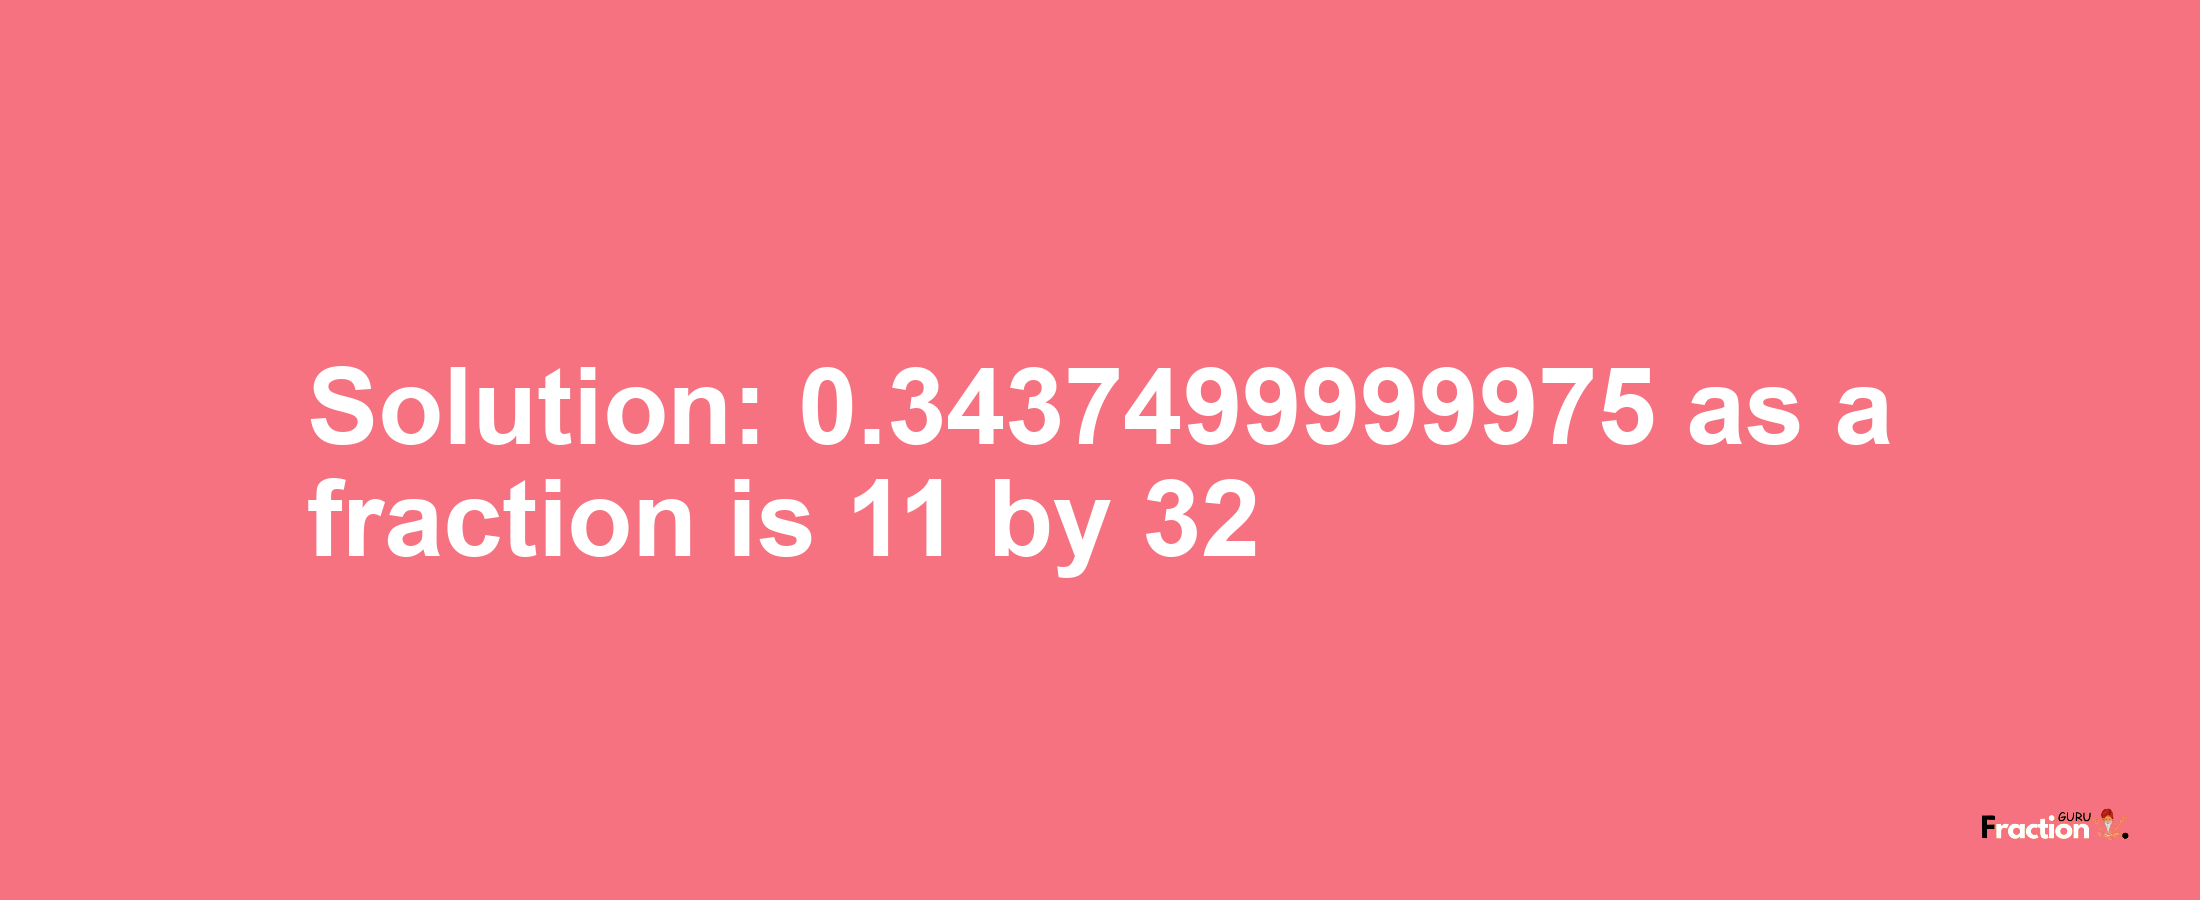 Solution:0.3437499999975 as a fraction is 11/32